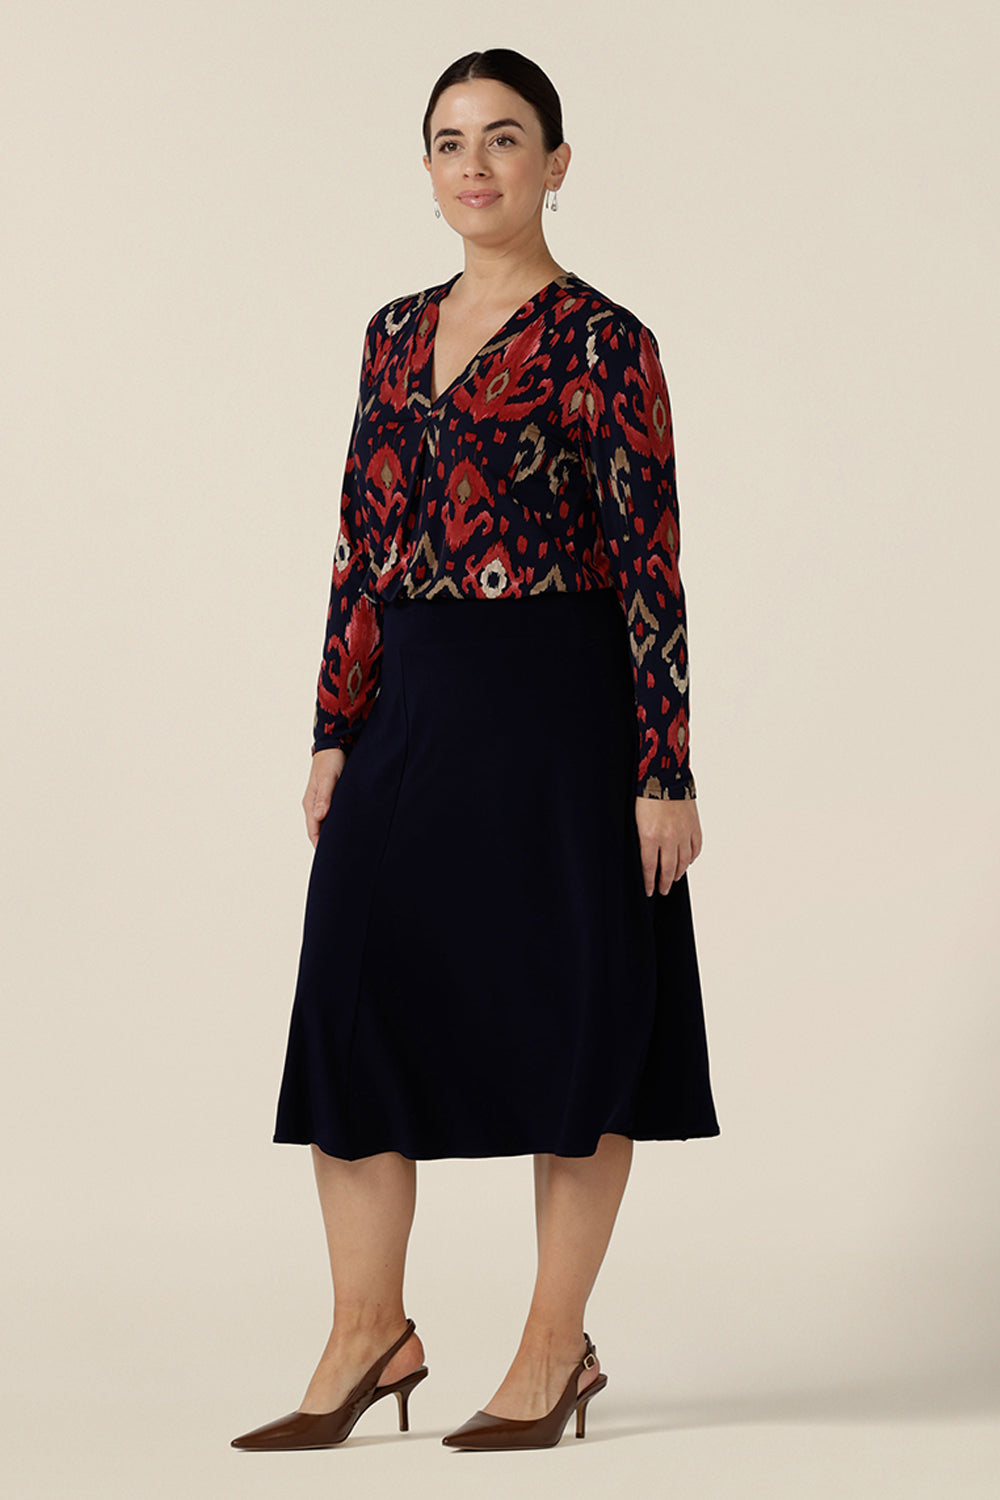 A great workwear top for women, the Dakota Top in Ikat is a V-neck, long sleeve top in soft stretch jersey. Worn with a navy blue, knee length skirt, easy care top is styled for corporate and office wear. Made in Australia in sizes 8 to 24, petite to plus sizes.